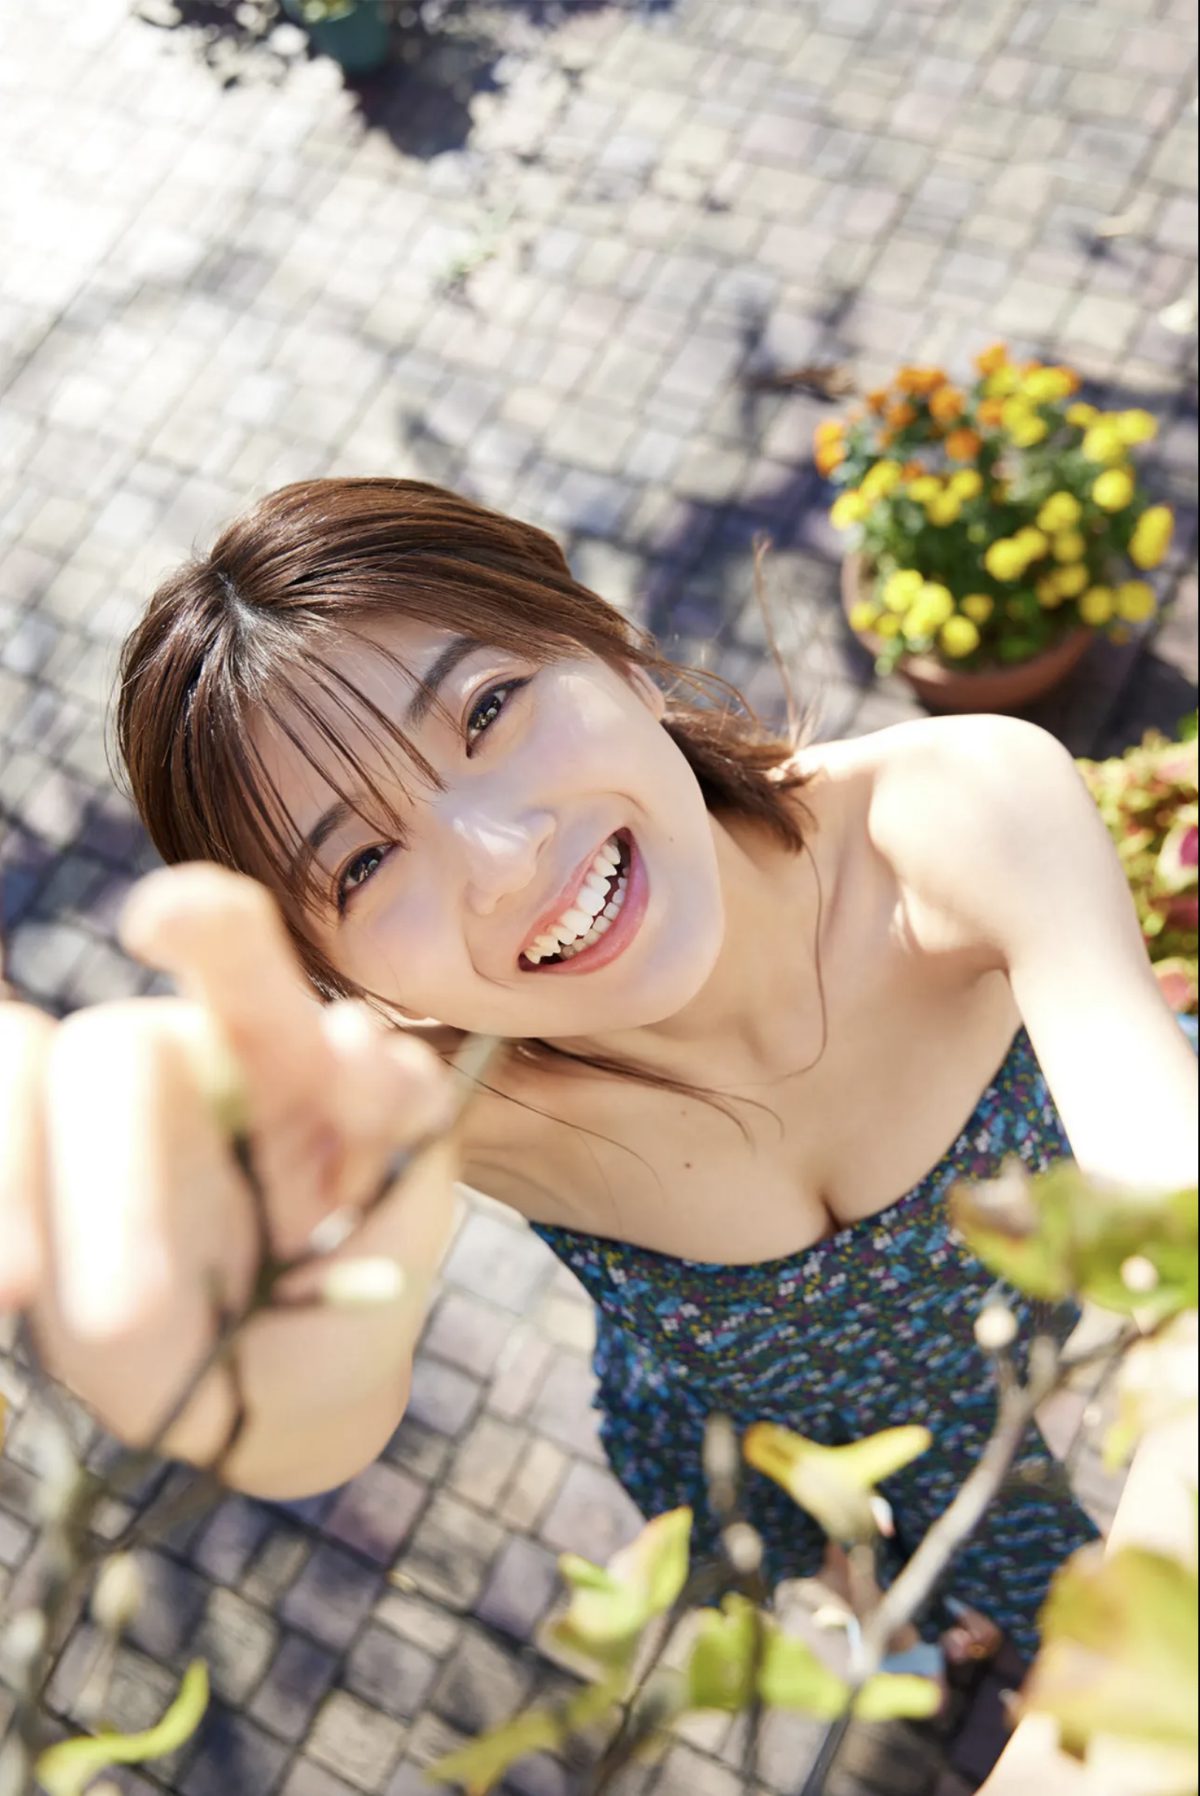 FRIDAY Digital Photobook 2021 03 10 Mio Kudo 工藤美桜 Adult SEXY that fascinates for the first time はじめて魅せる大人ＳＥＸＹ 020 4810295805.jpg